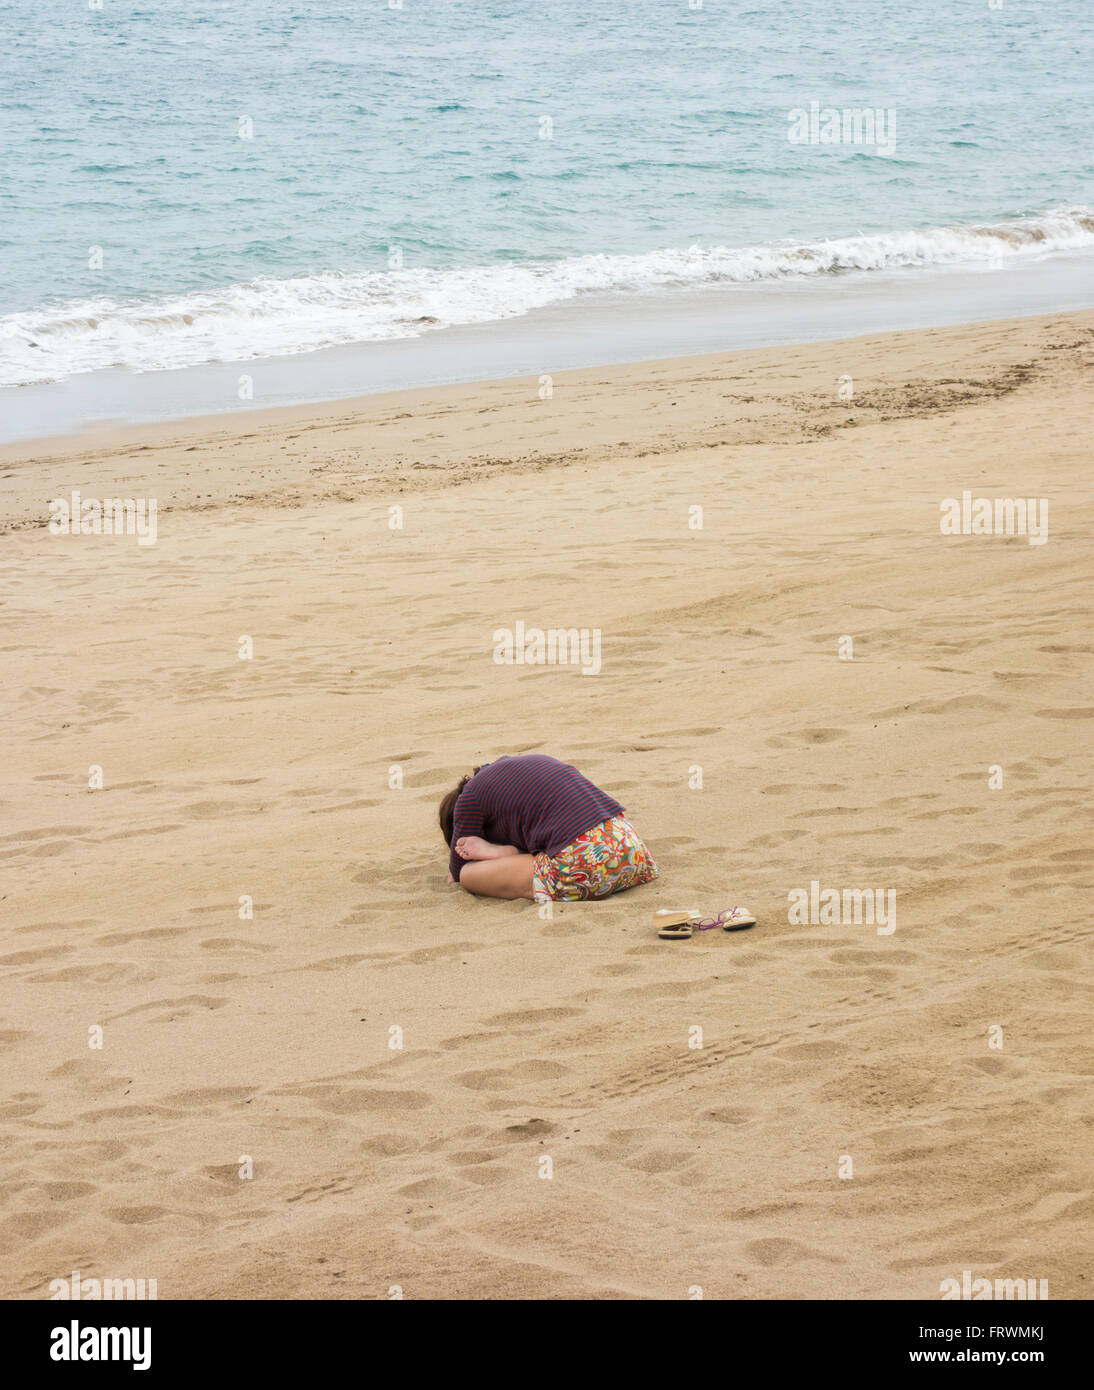 Woman meditating on beach Banque D'Images